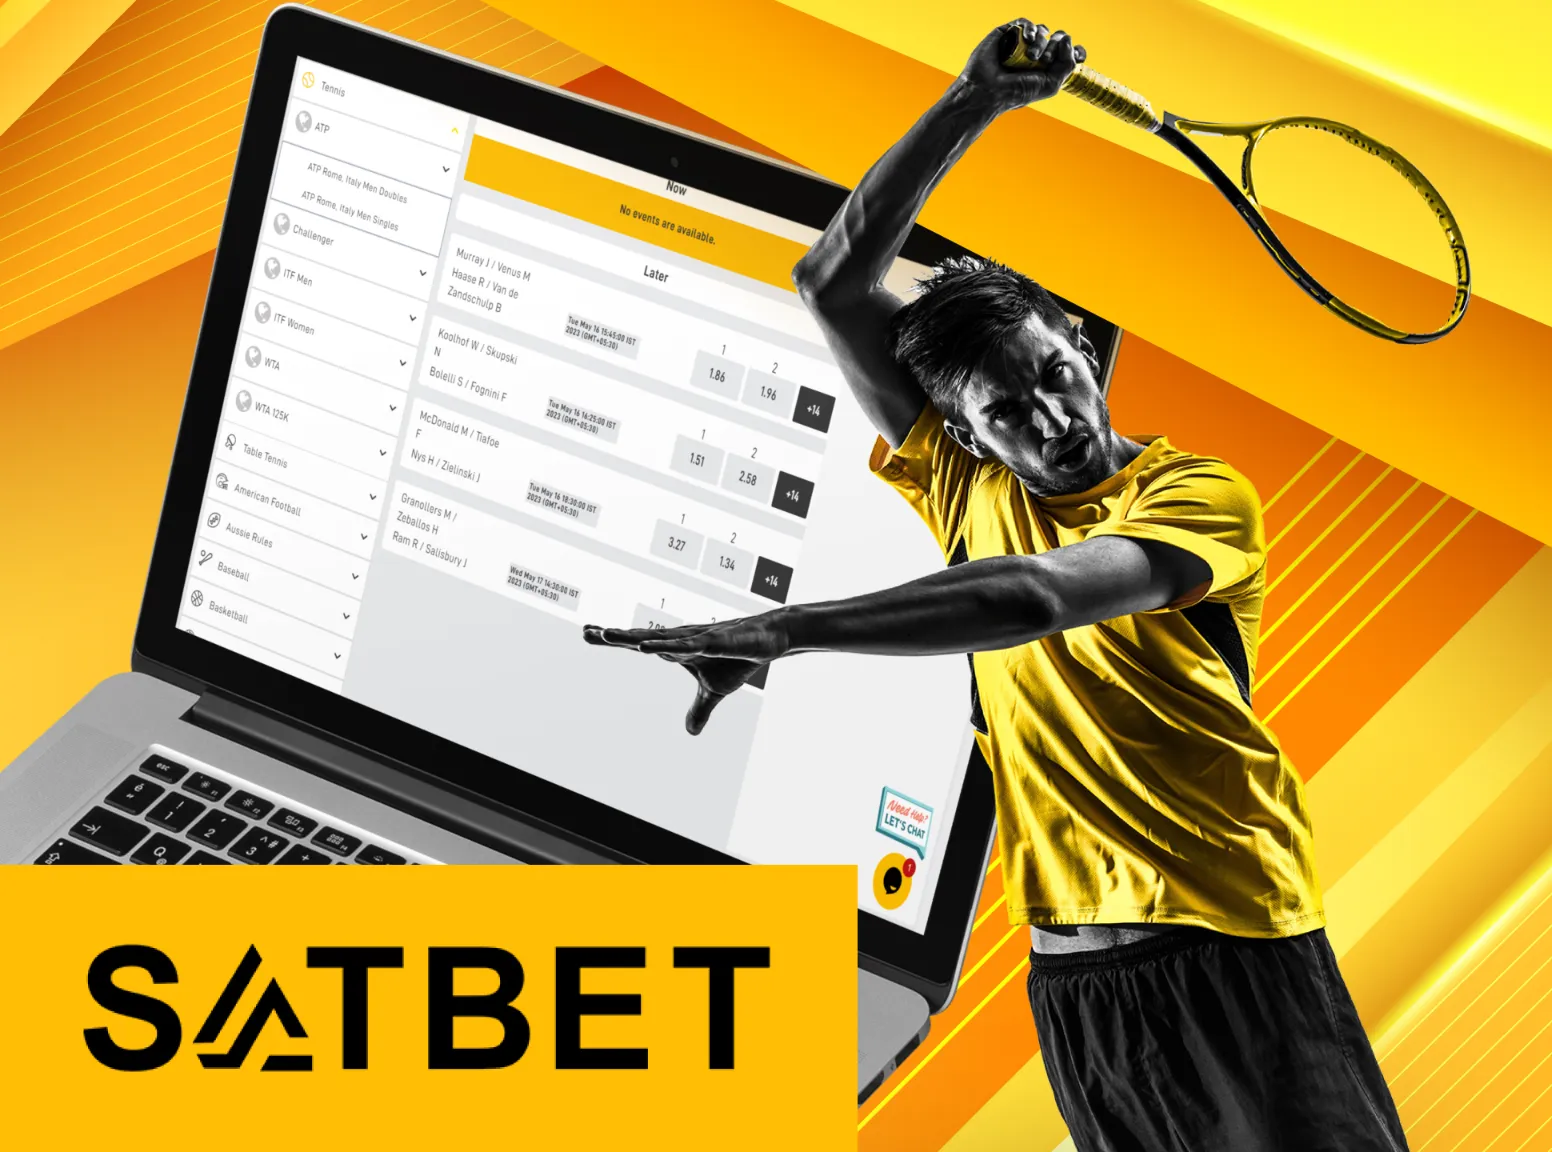 Watch legendary tennis matches at Satbet and make bets.